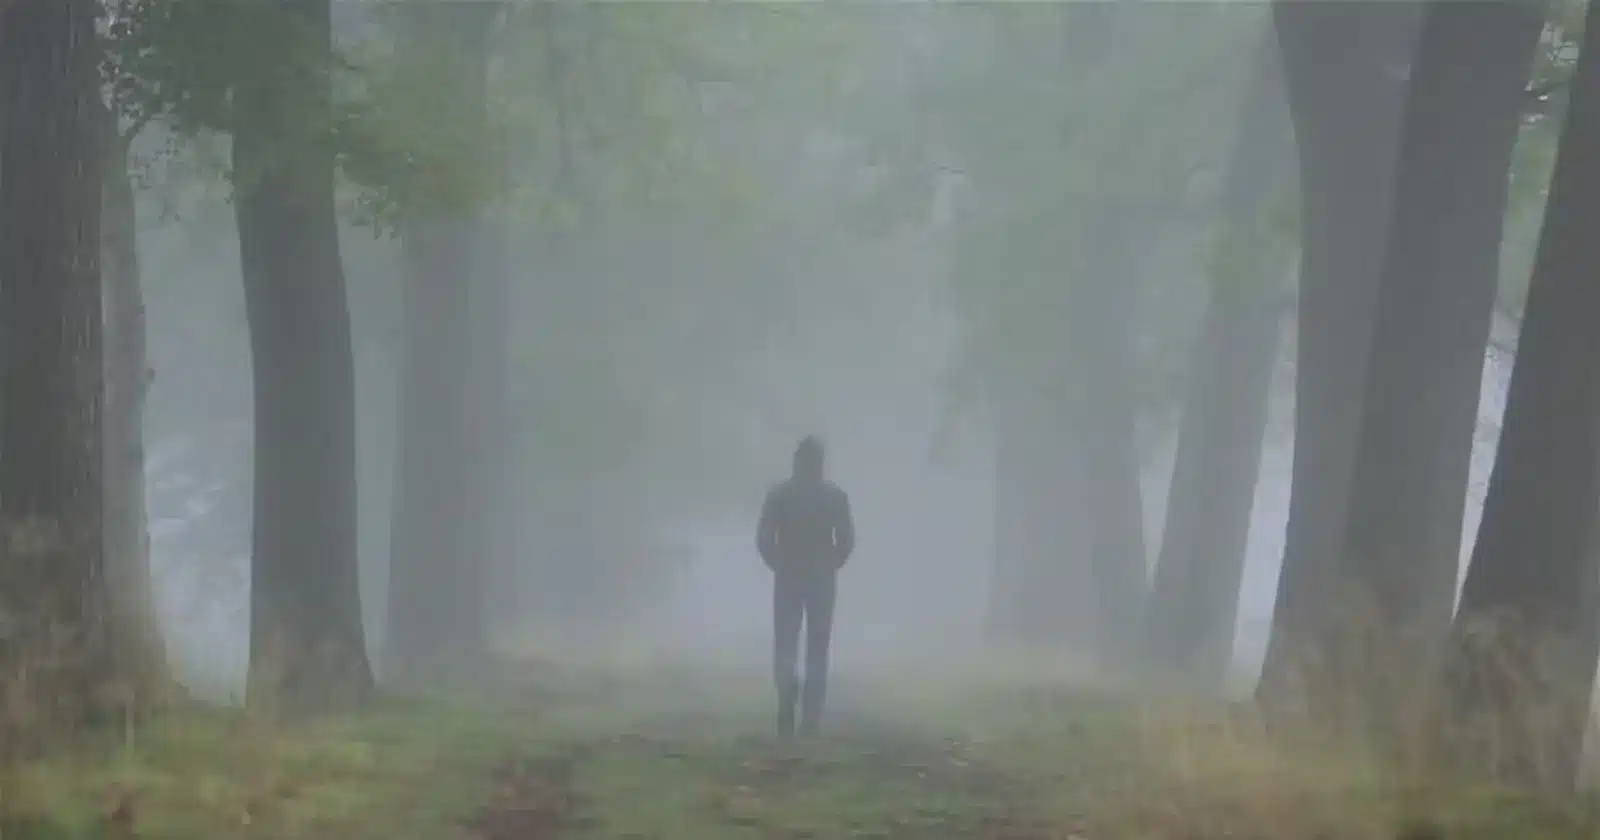 Lost in the fog, a man takes gentle steps, immersed in a serene atmosphere. A captivating moment symbolizing innocence.